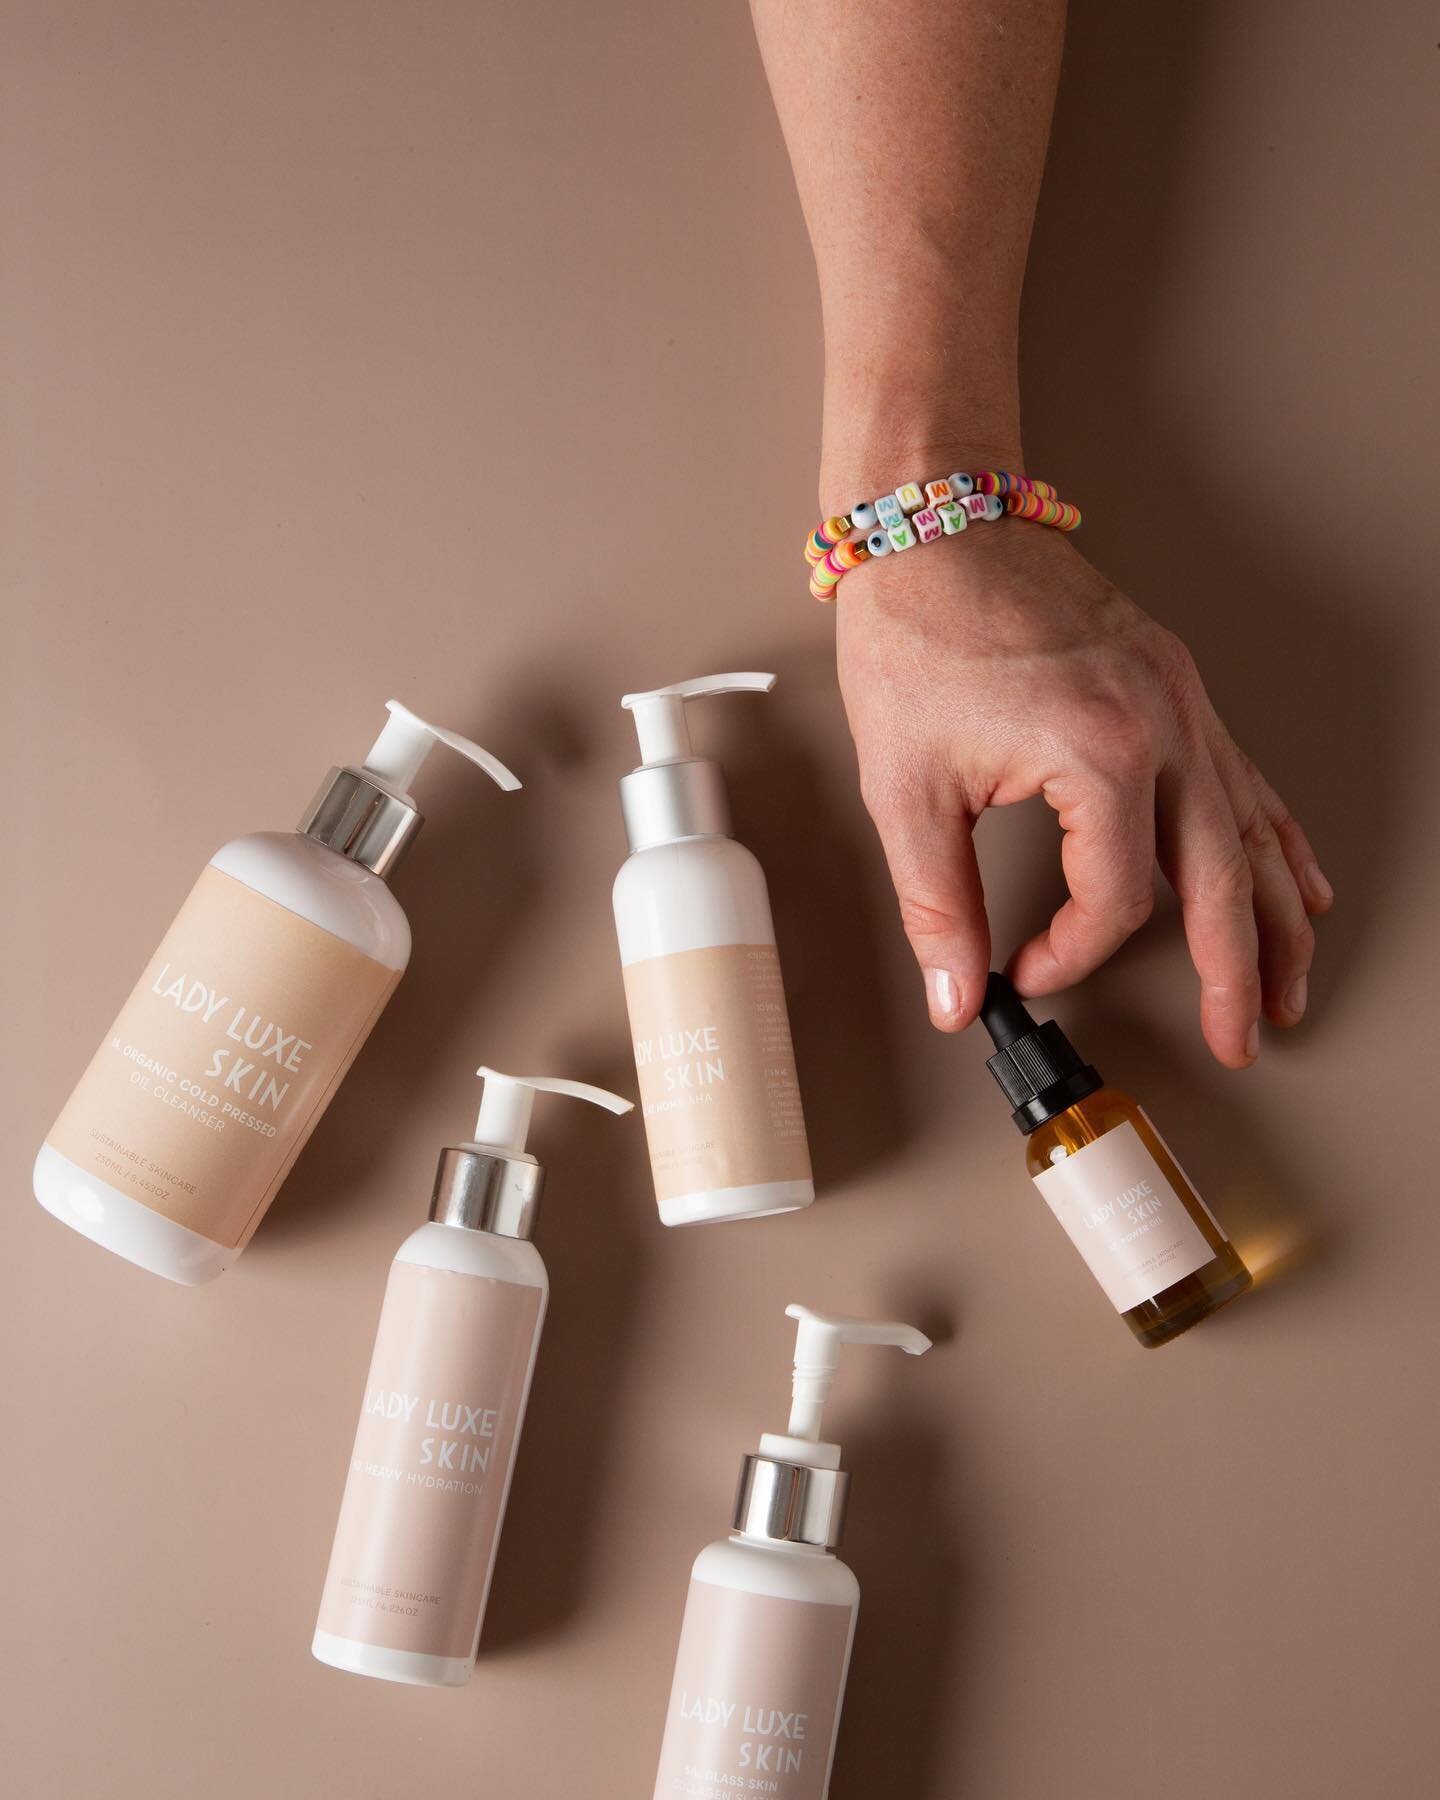 Serum vs. Moisturizer: What's the Difference? 🧴💧

Have you ever wondered about the skincare magic between a serum and a moisturizer? Let's break it down!

🌟 Serums: These lightweight, fast-absorbing liquids are like the power boosters of your 